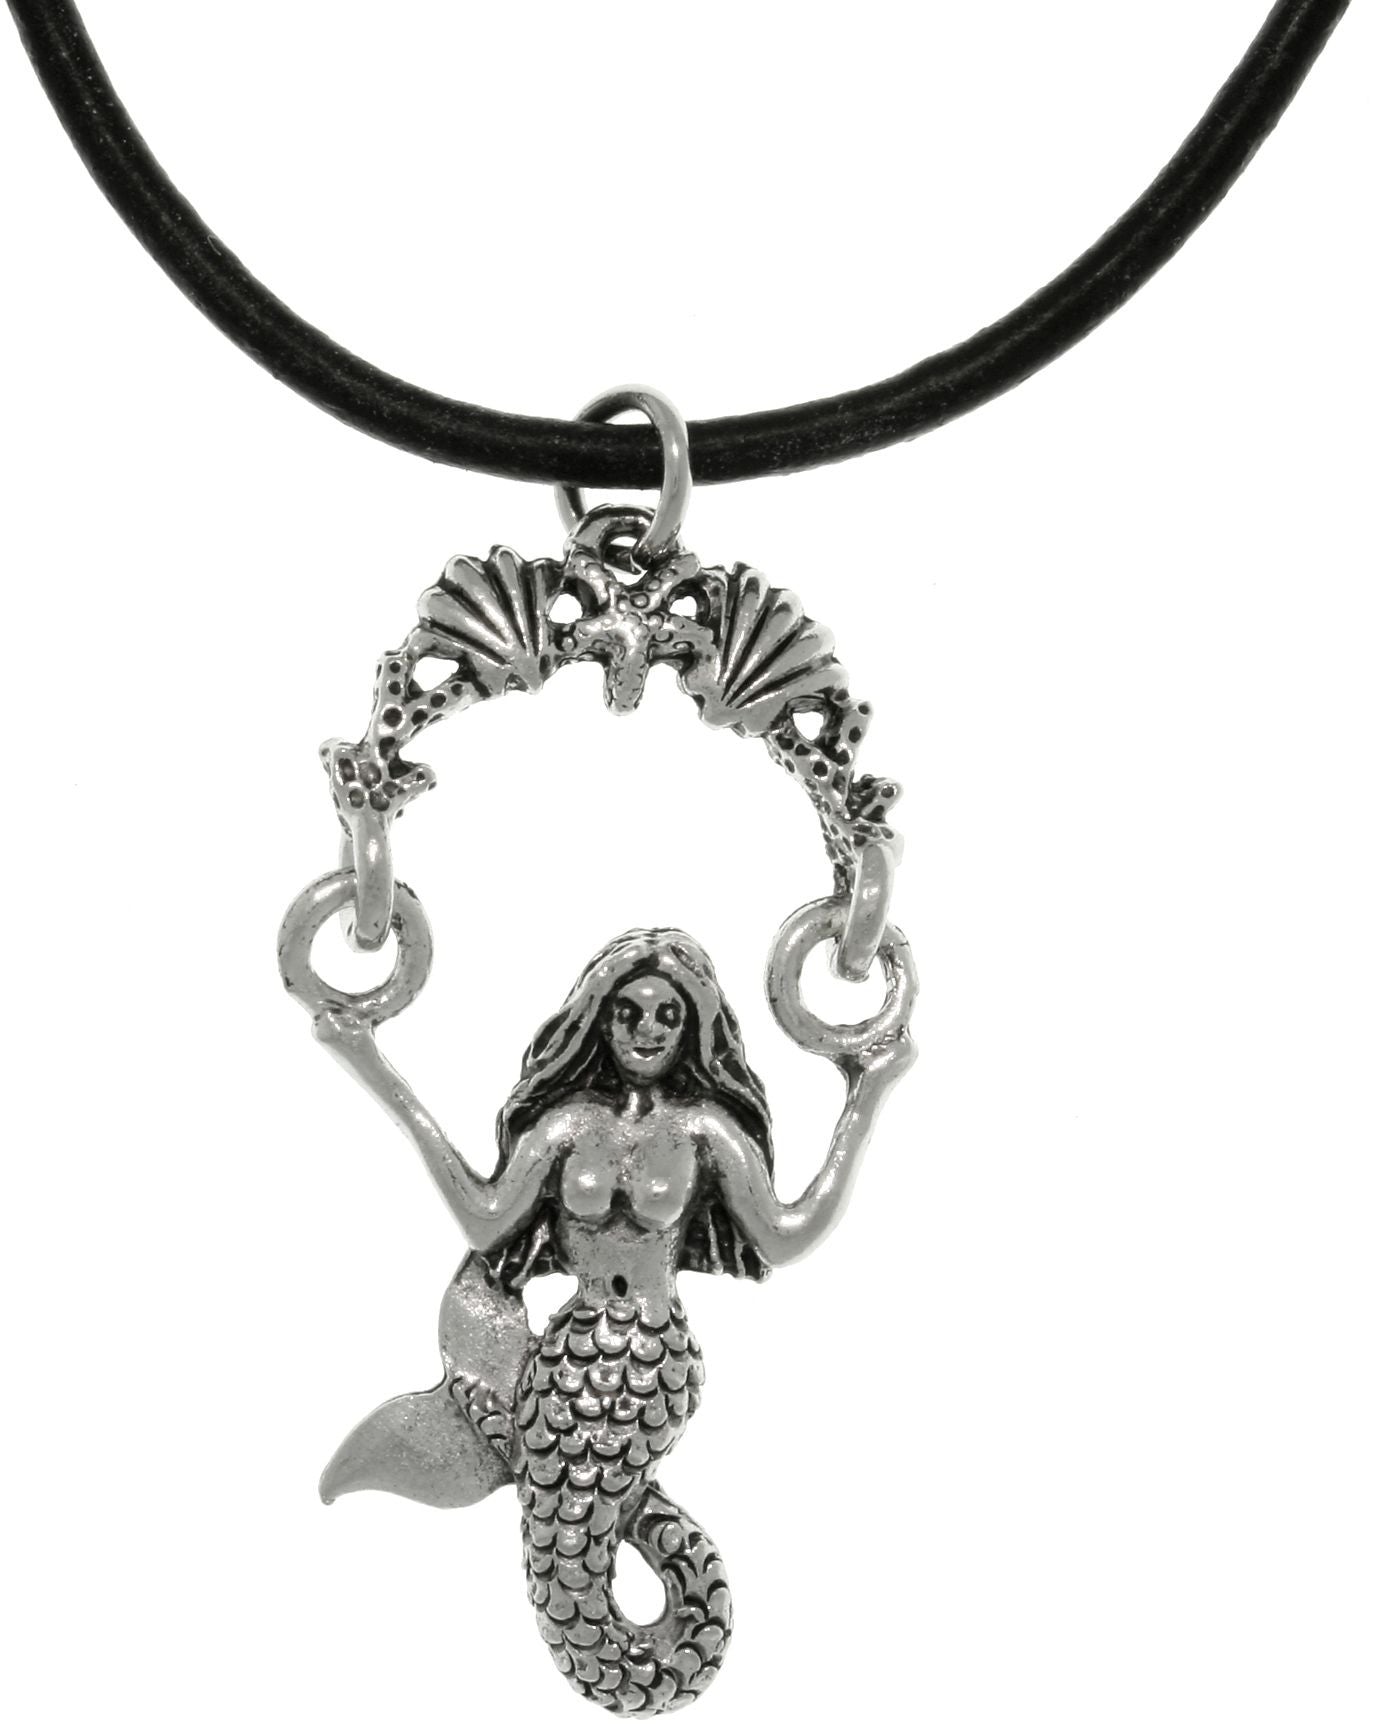 Jewelry Trends Pewter Beautiful Mermaid Sea Life Swing Pendant on 18 inch Black Leather Necklace